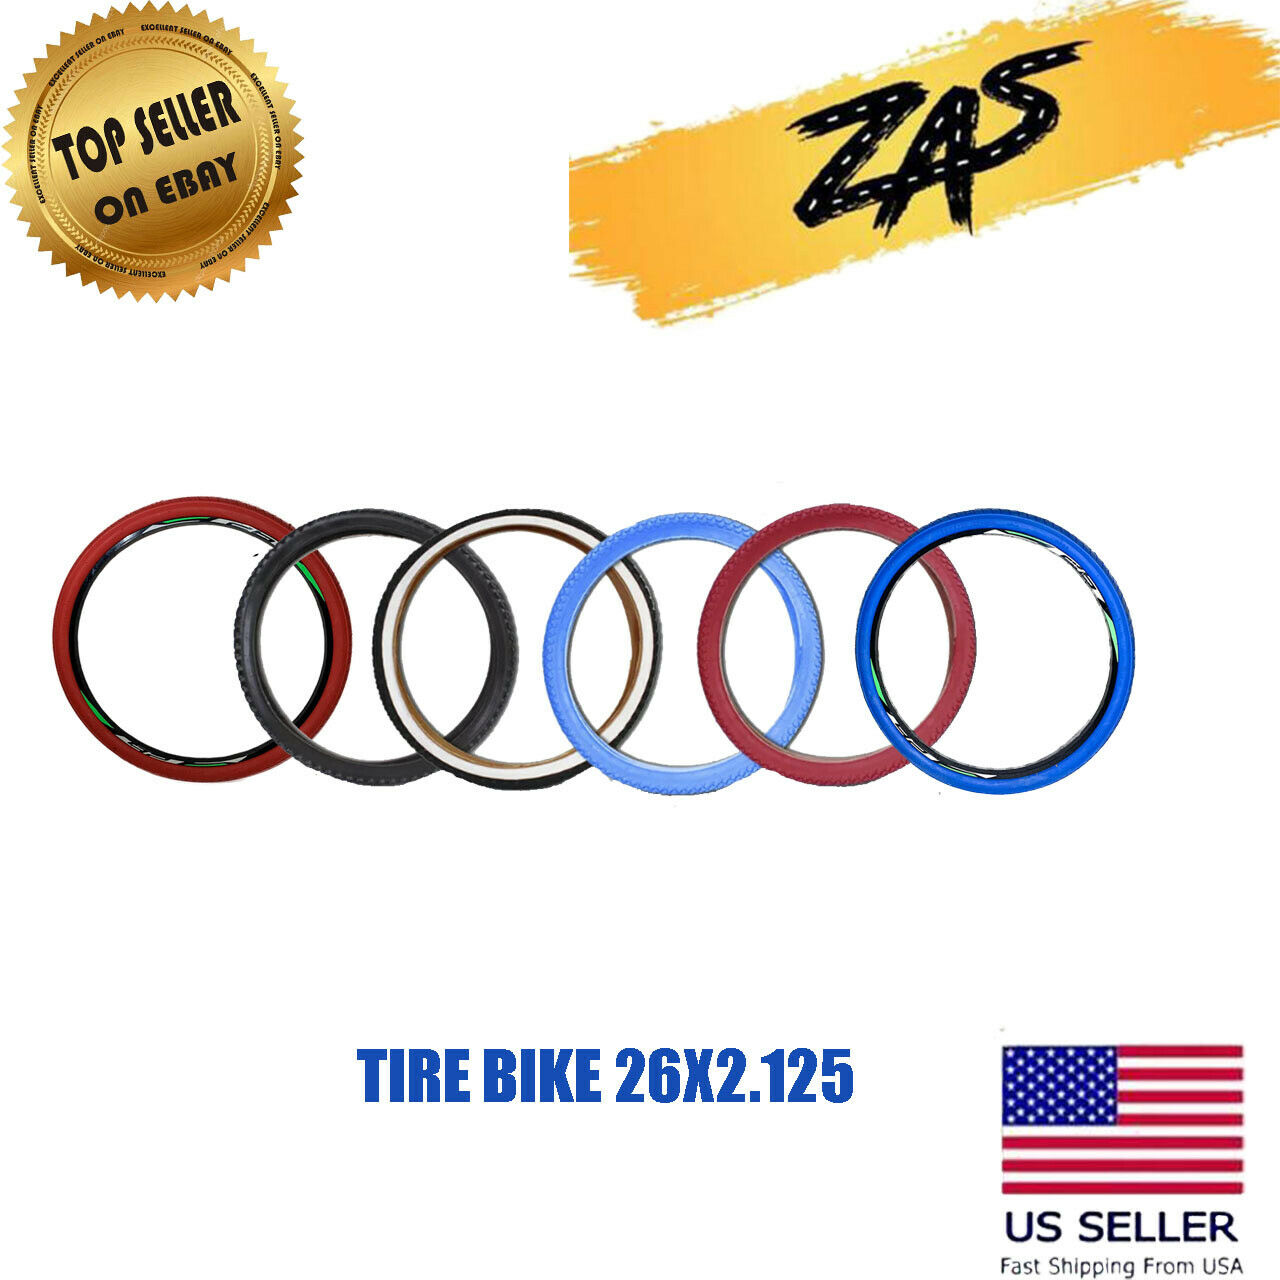 Bicycle Tire 26" X 2.125 Black, White, Red & Blue High Quality Knobby Tire